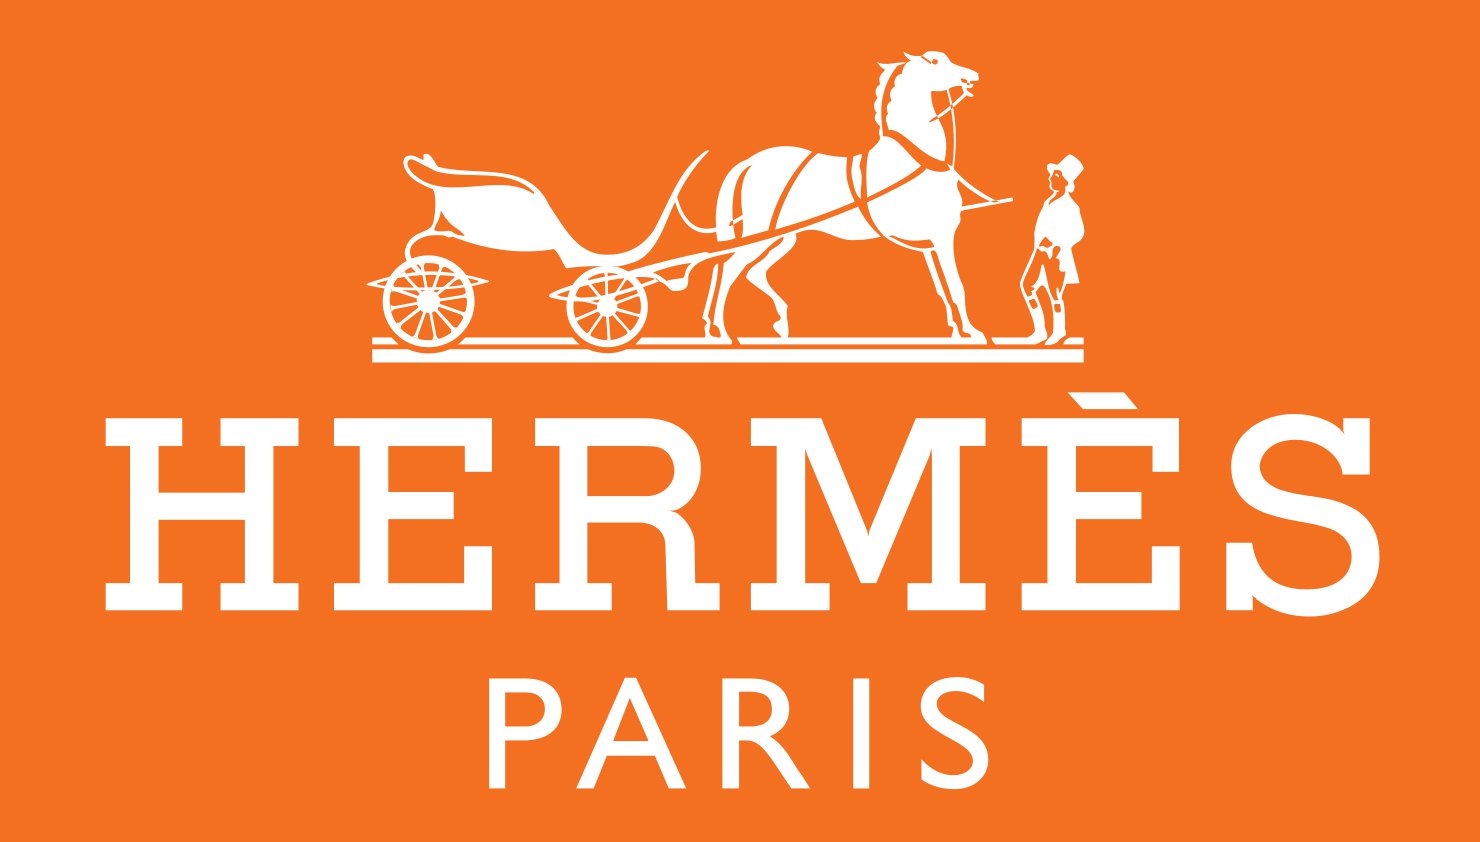 Hermes logo and symbol, meaning 